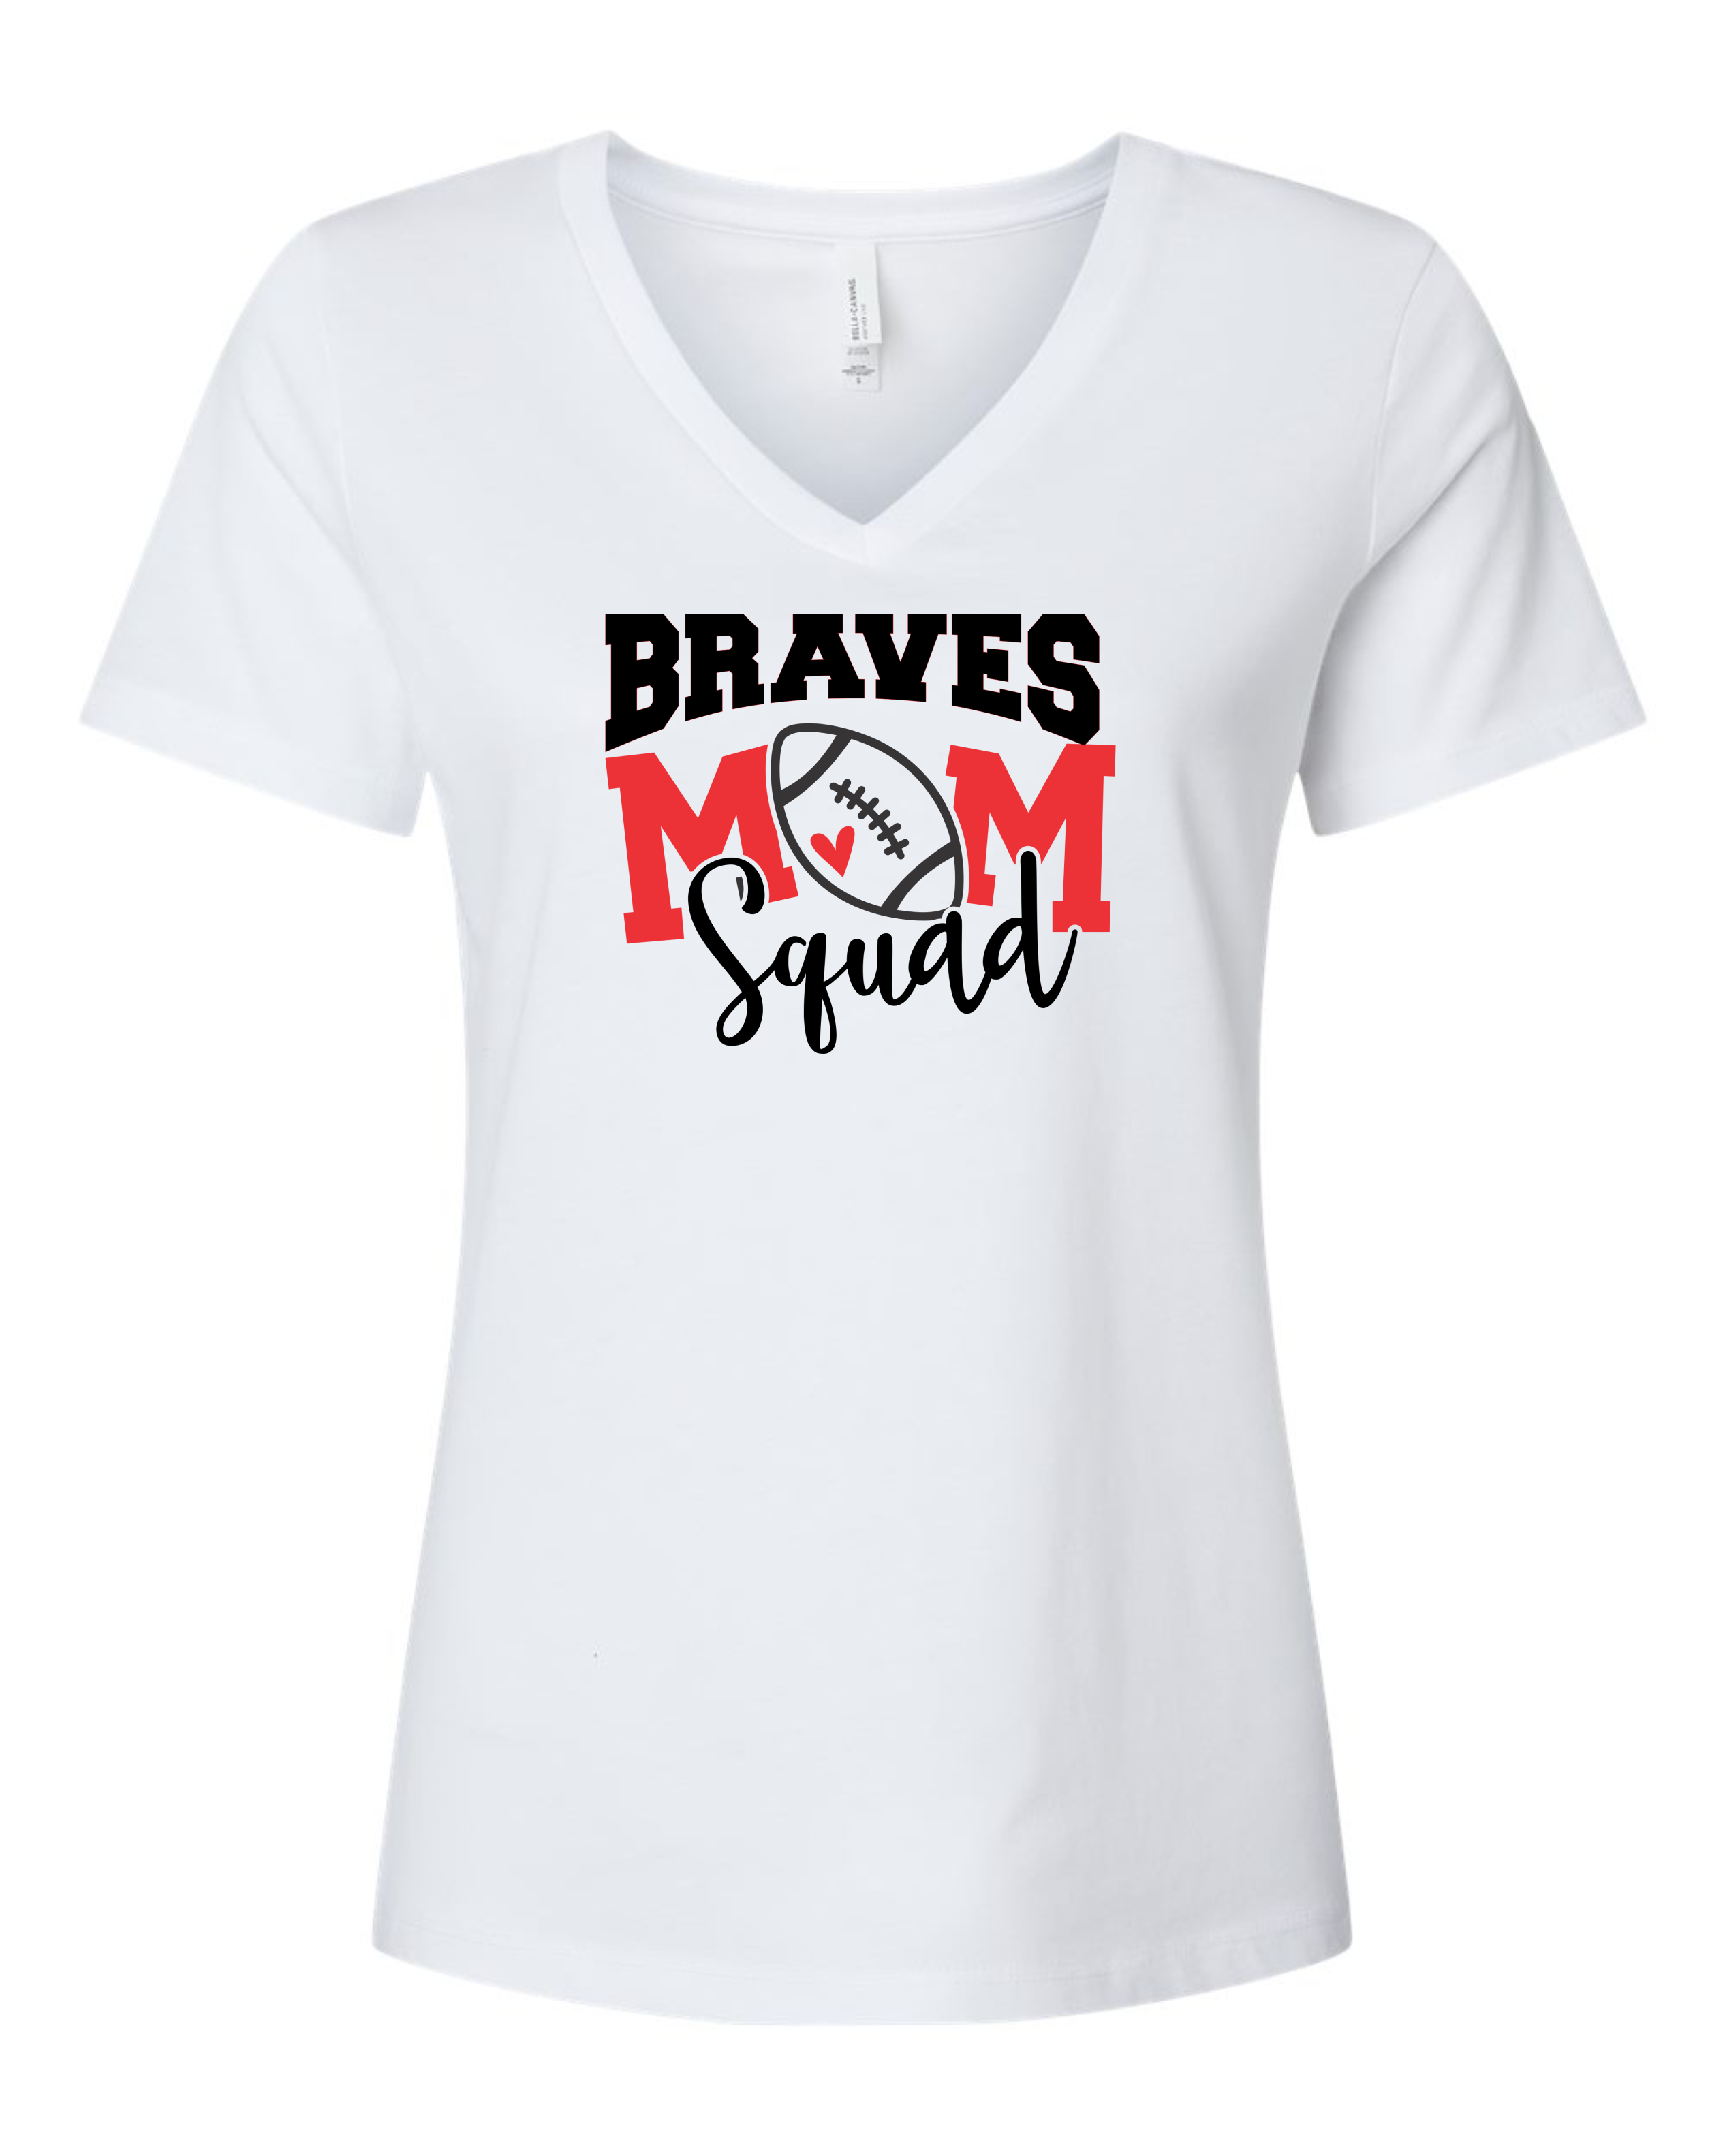 Mechanicsville Braves Women's Bella and Canvas Short Sleeve Relaxed Fit V Neck-FOOTBALL MOM SQUAD